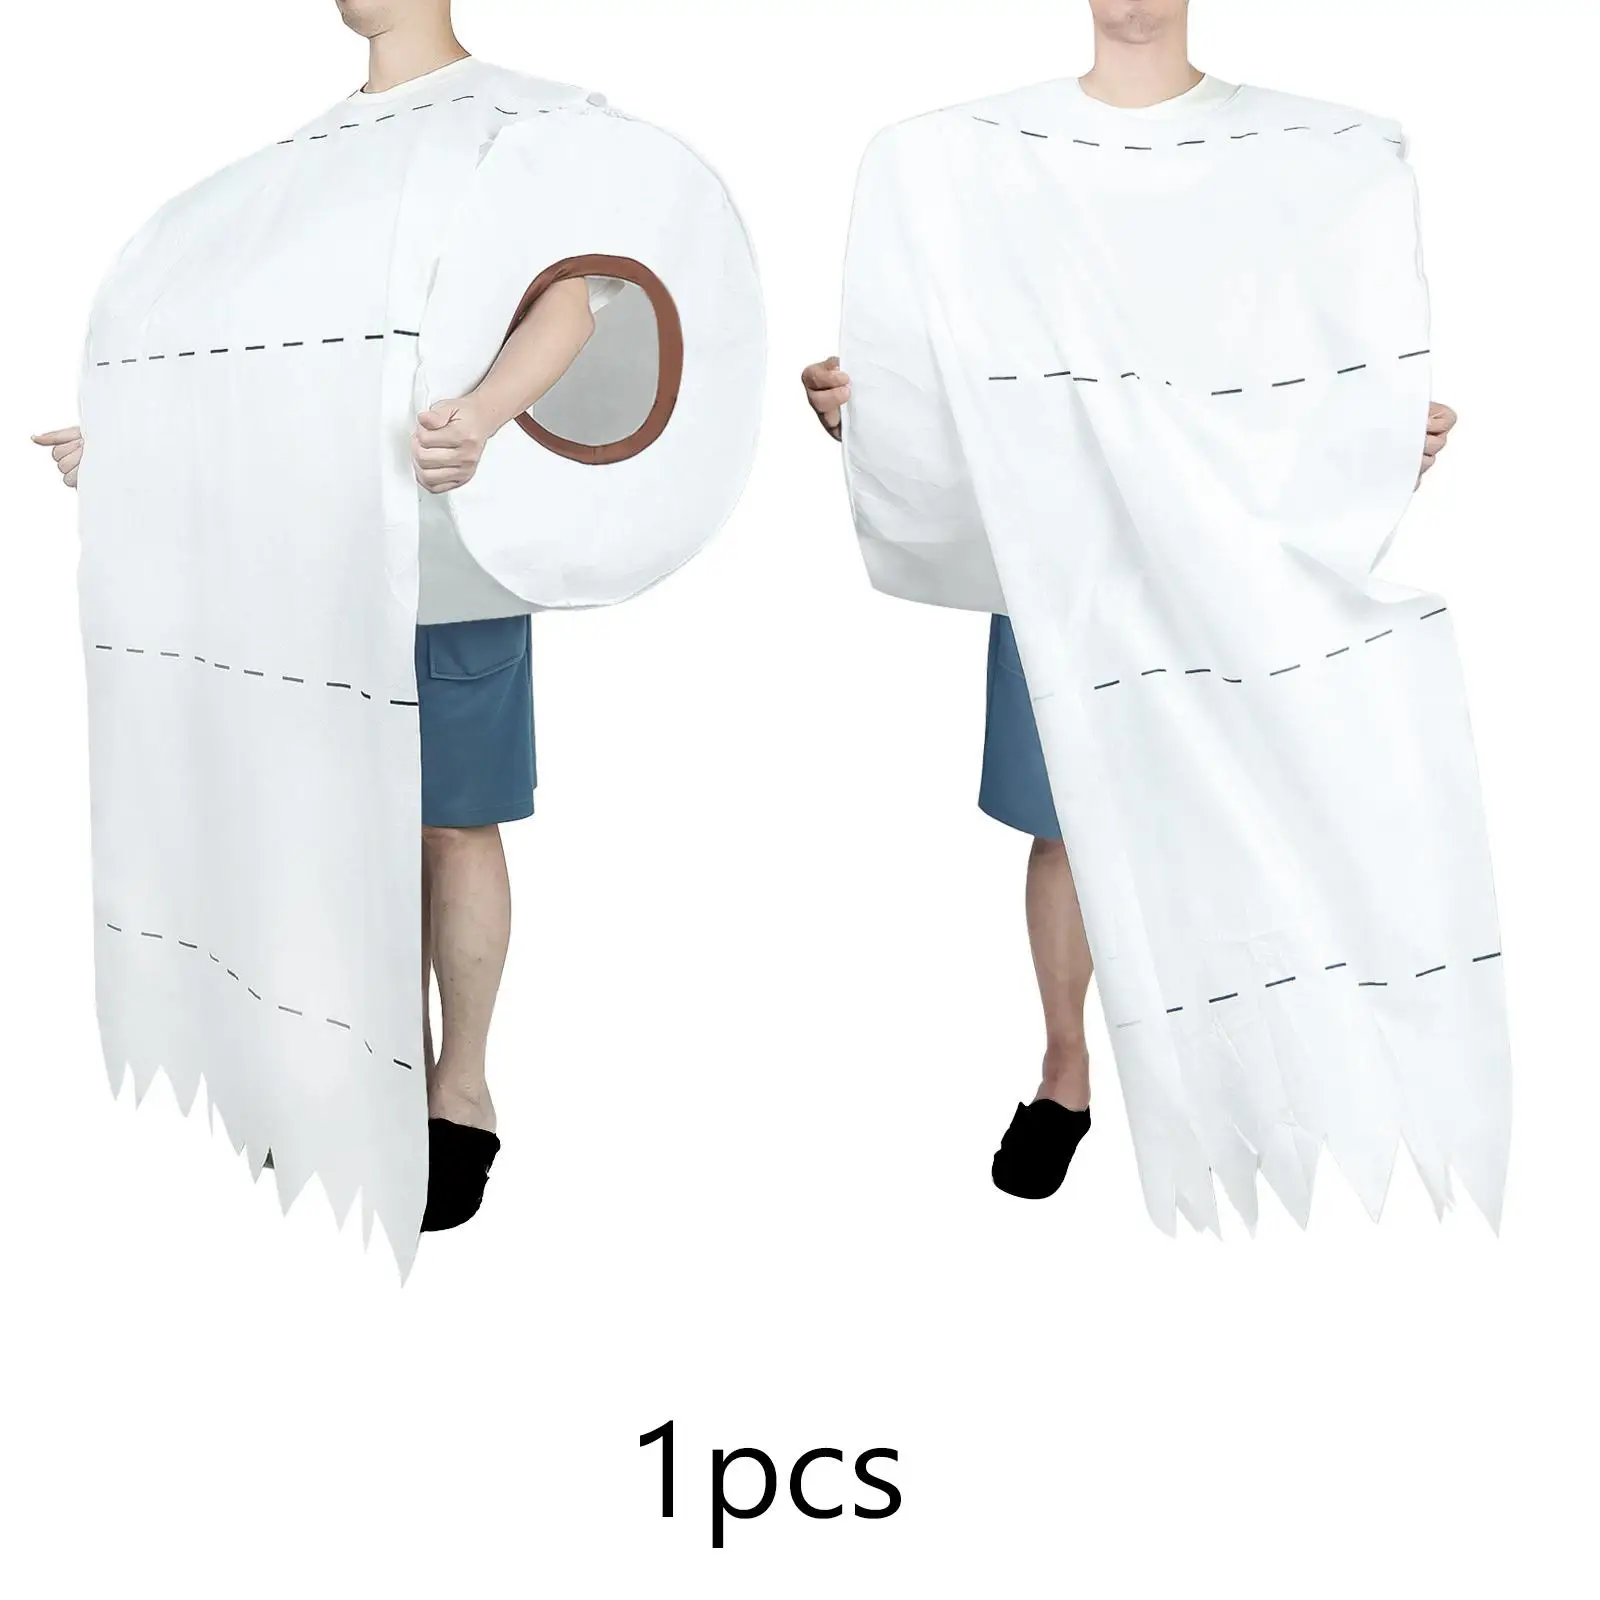 Toilet Tissue Costume Hilarious Dress up Cosplay Costume Roll Paper Cosplay Clothing for Cosplay Halloween Party Couples Men